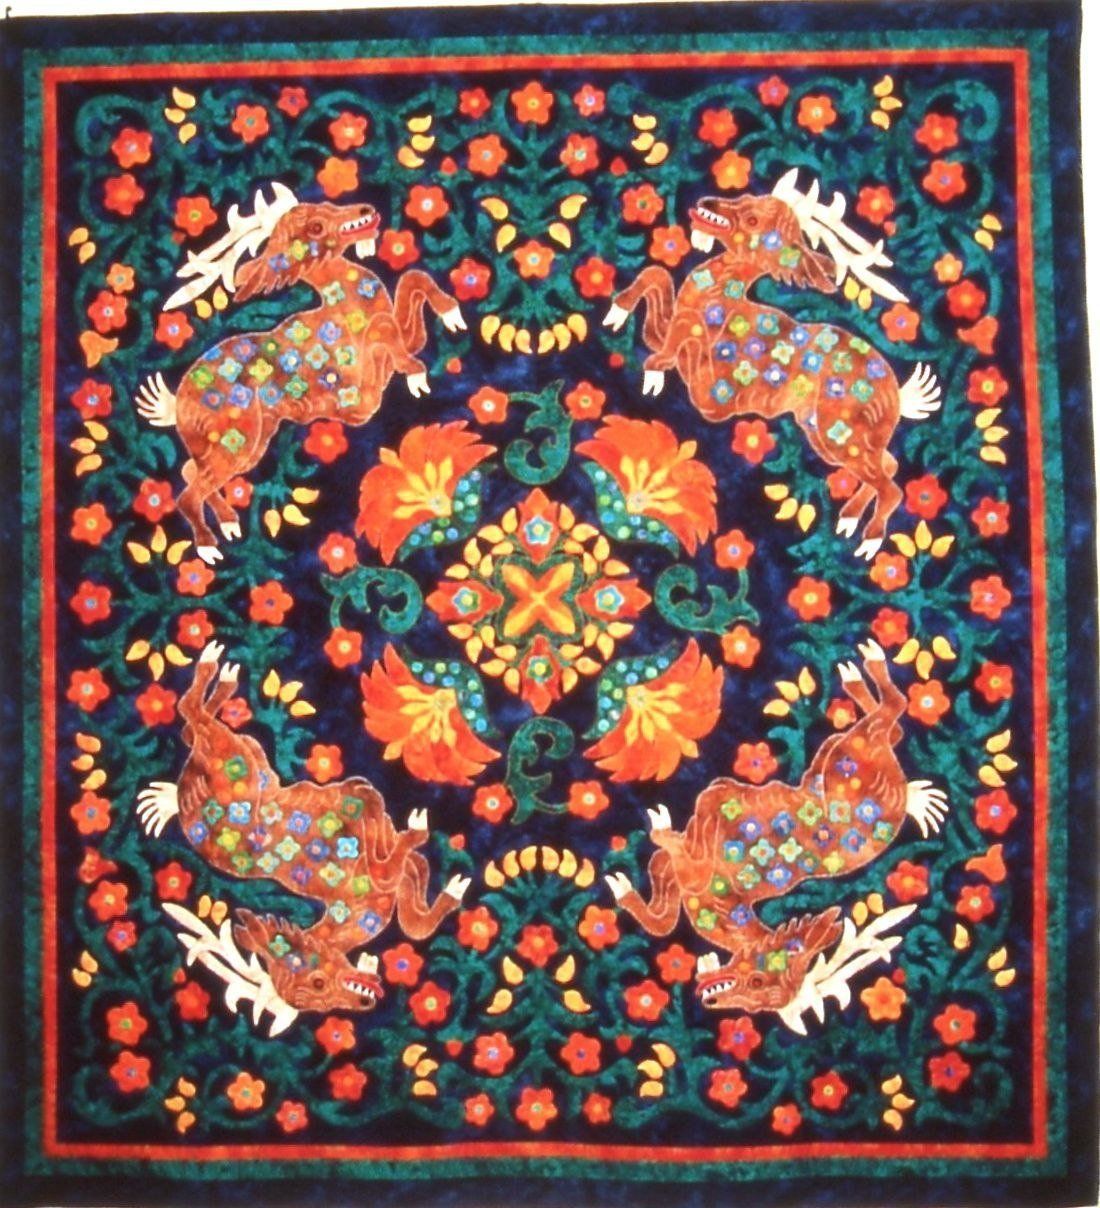 The Tang Tango by Suzanne Marshall, a Quilt Maker